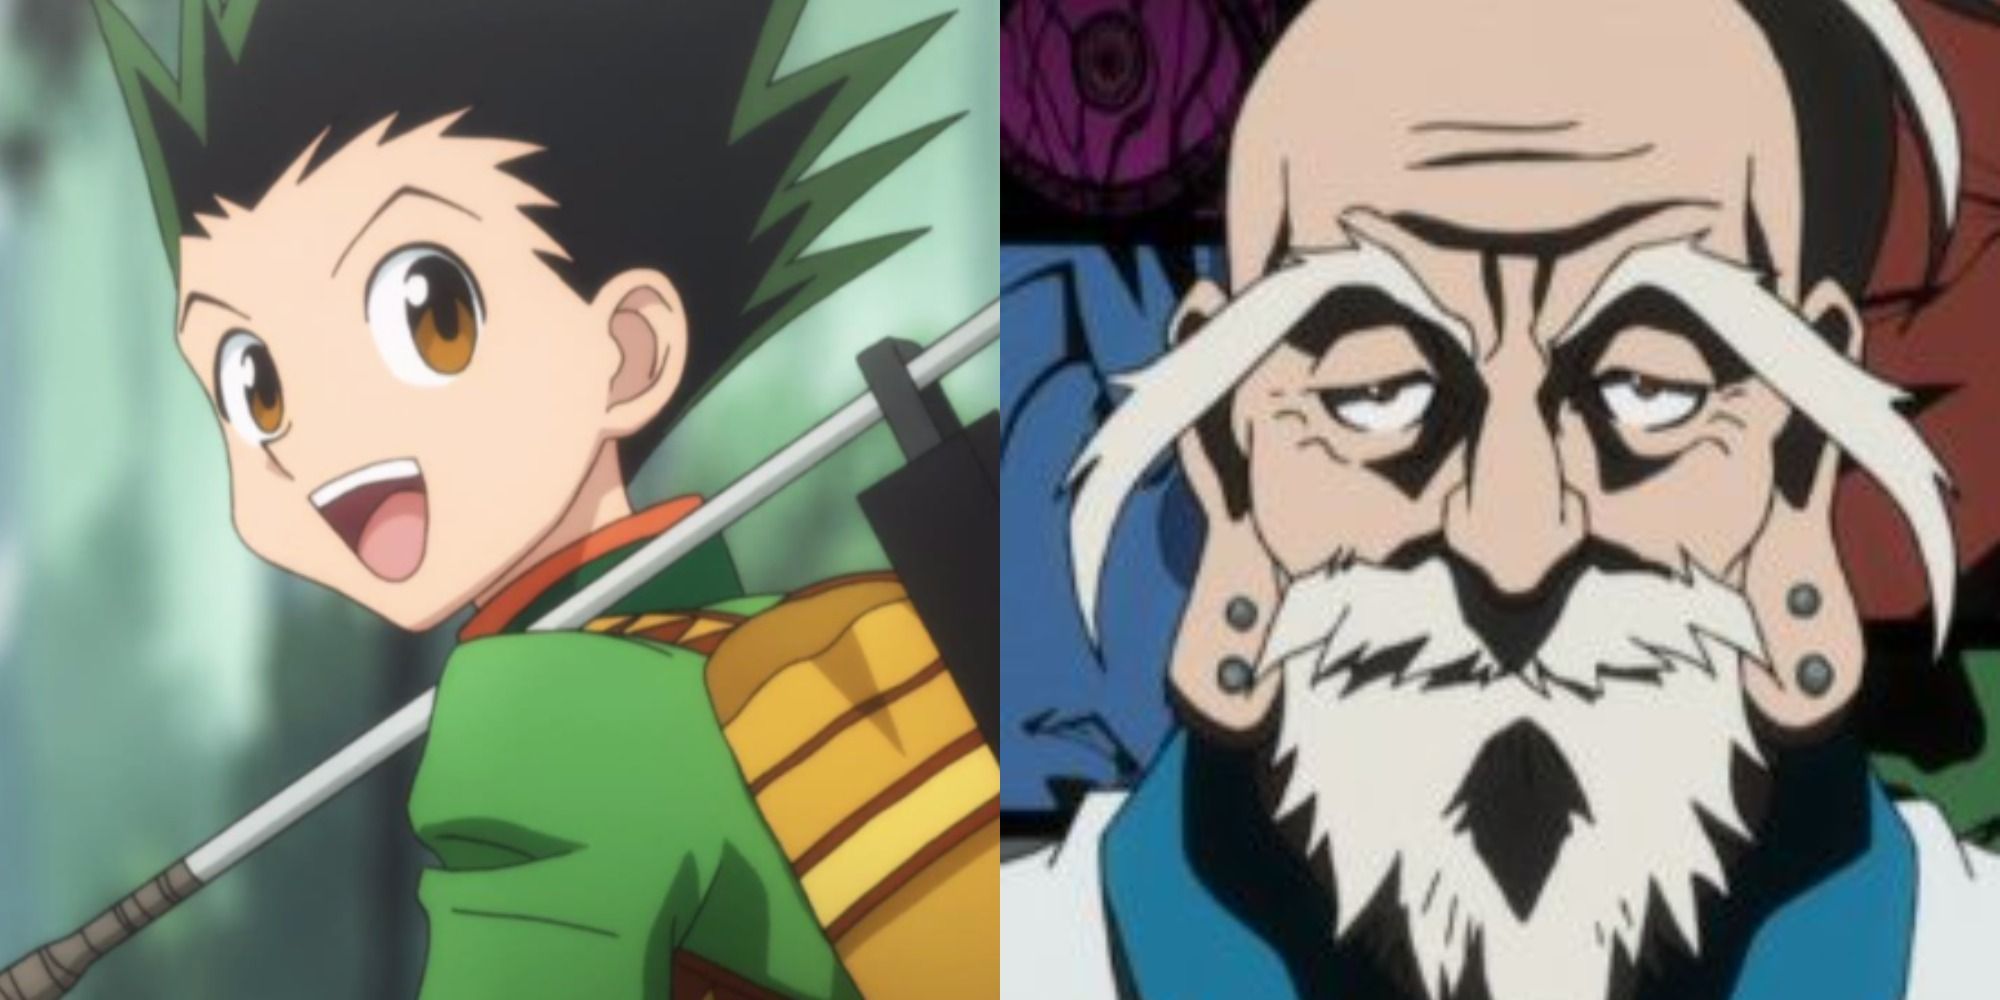 Did Hunter x Hunter surpass every other anime in Power Systems?